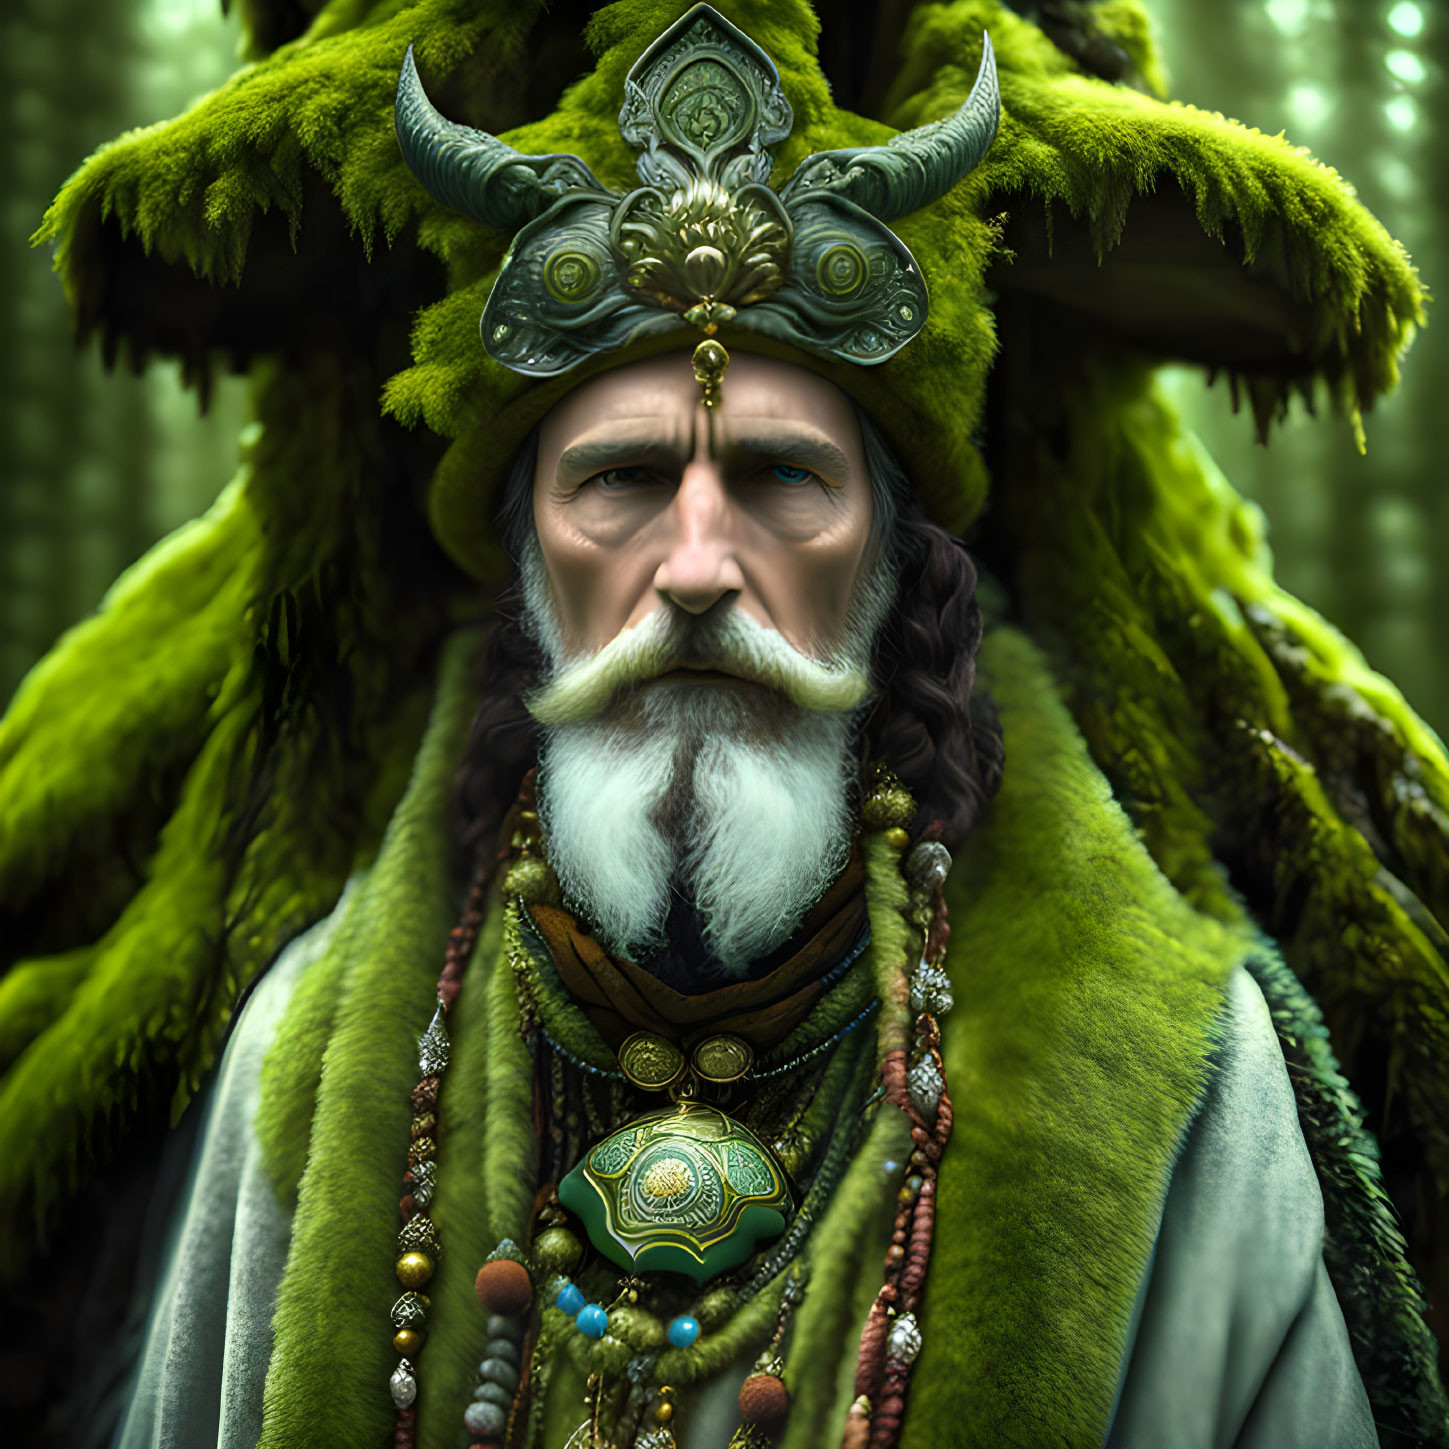 The Druid King Morcant